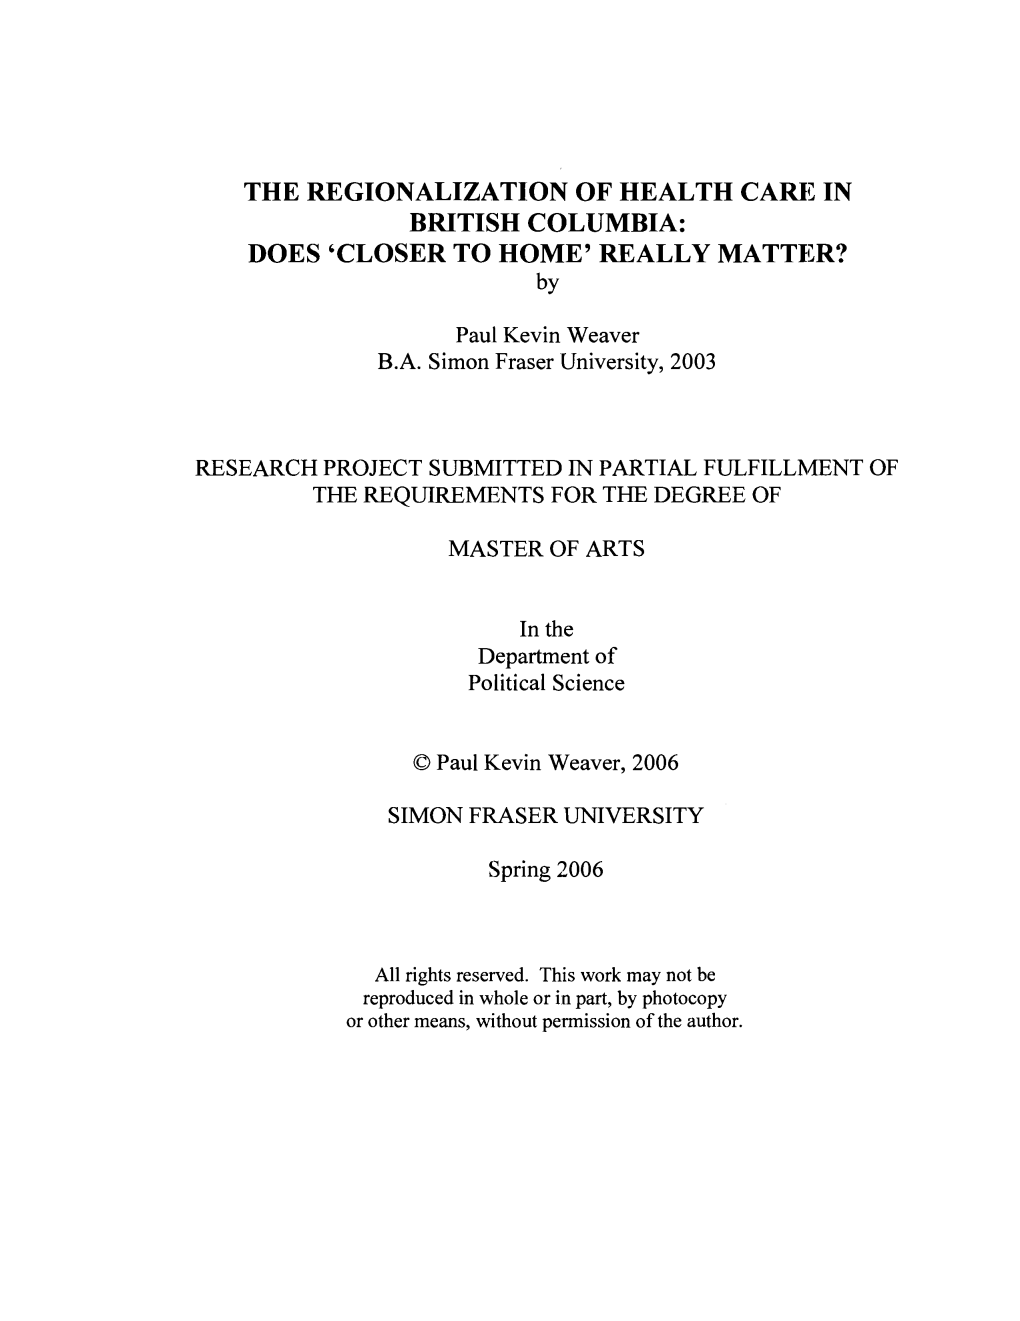 THE REGIONALIZATION of HEALTH CARE in BRITISH COLUMBIA: DOES 'CLOSER to HOME' REALLY MATTER? By